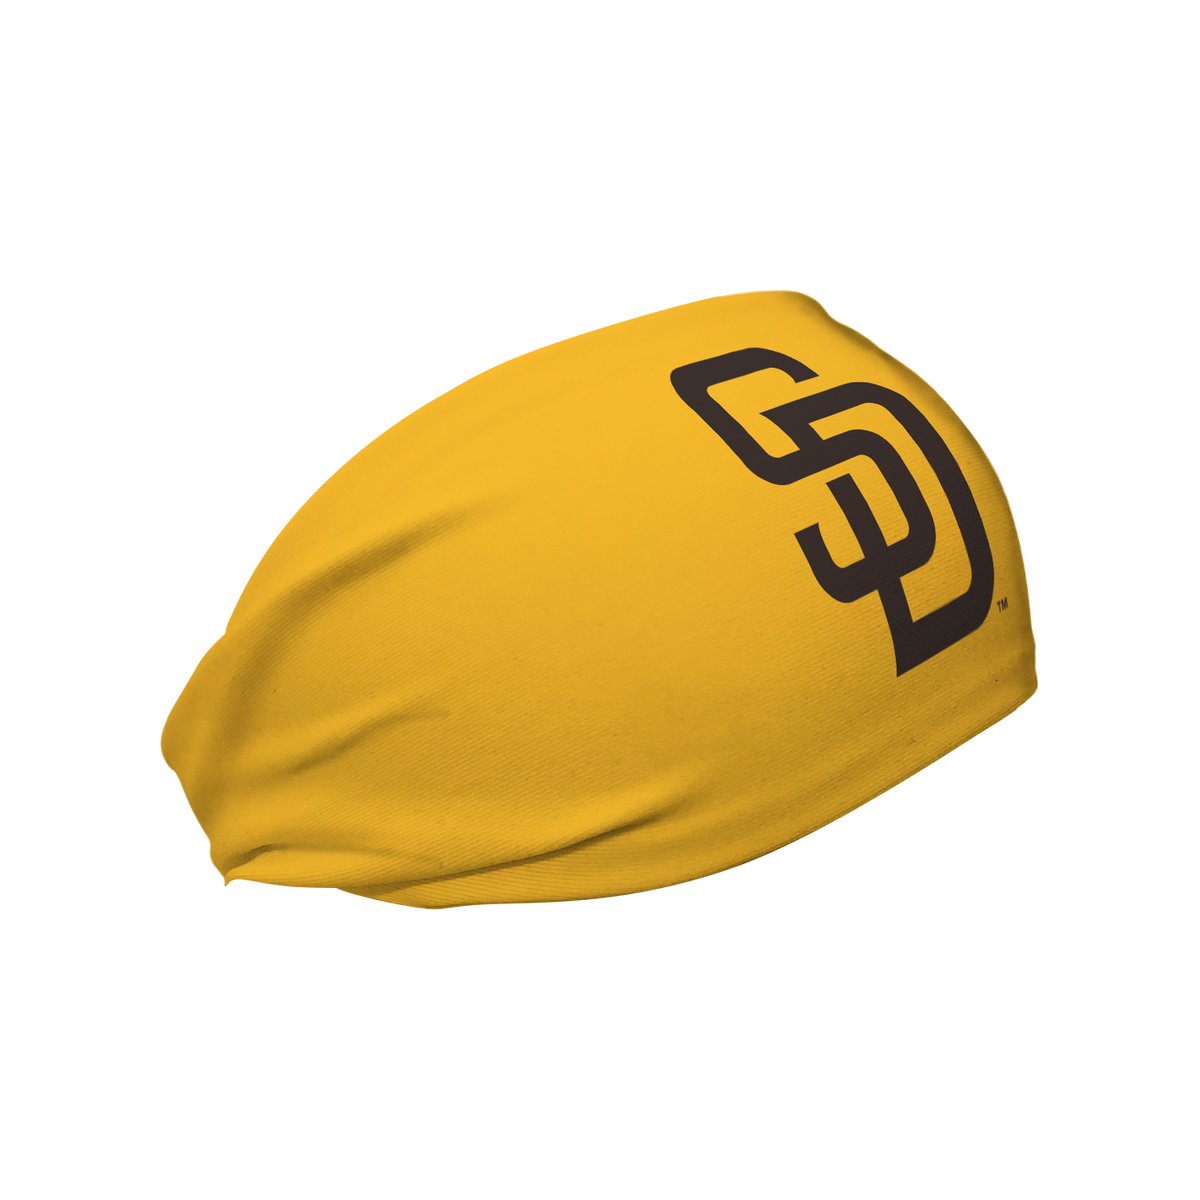 Official San Diego Padres Hats, Padres Cap, Padres Hats, Beanies